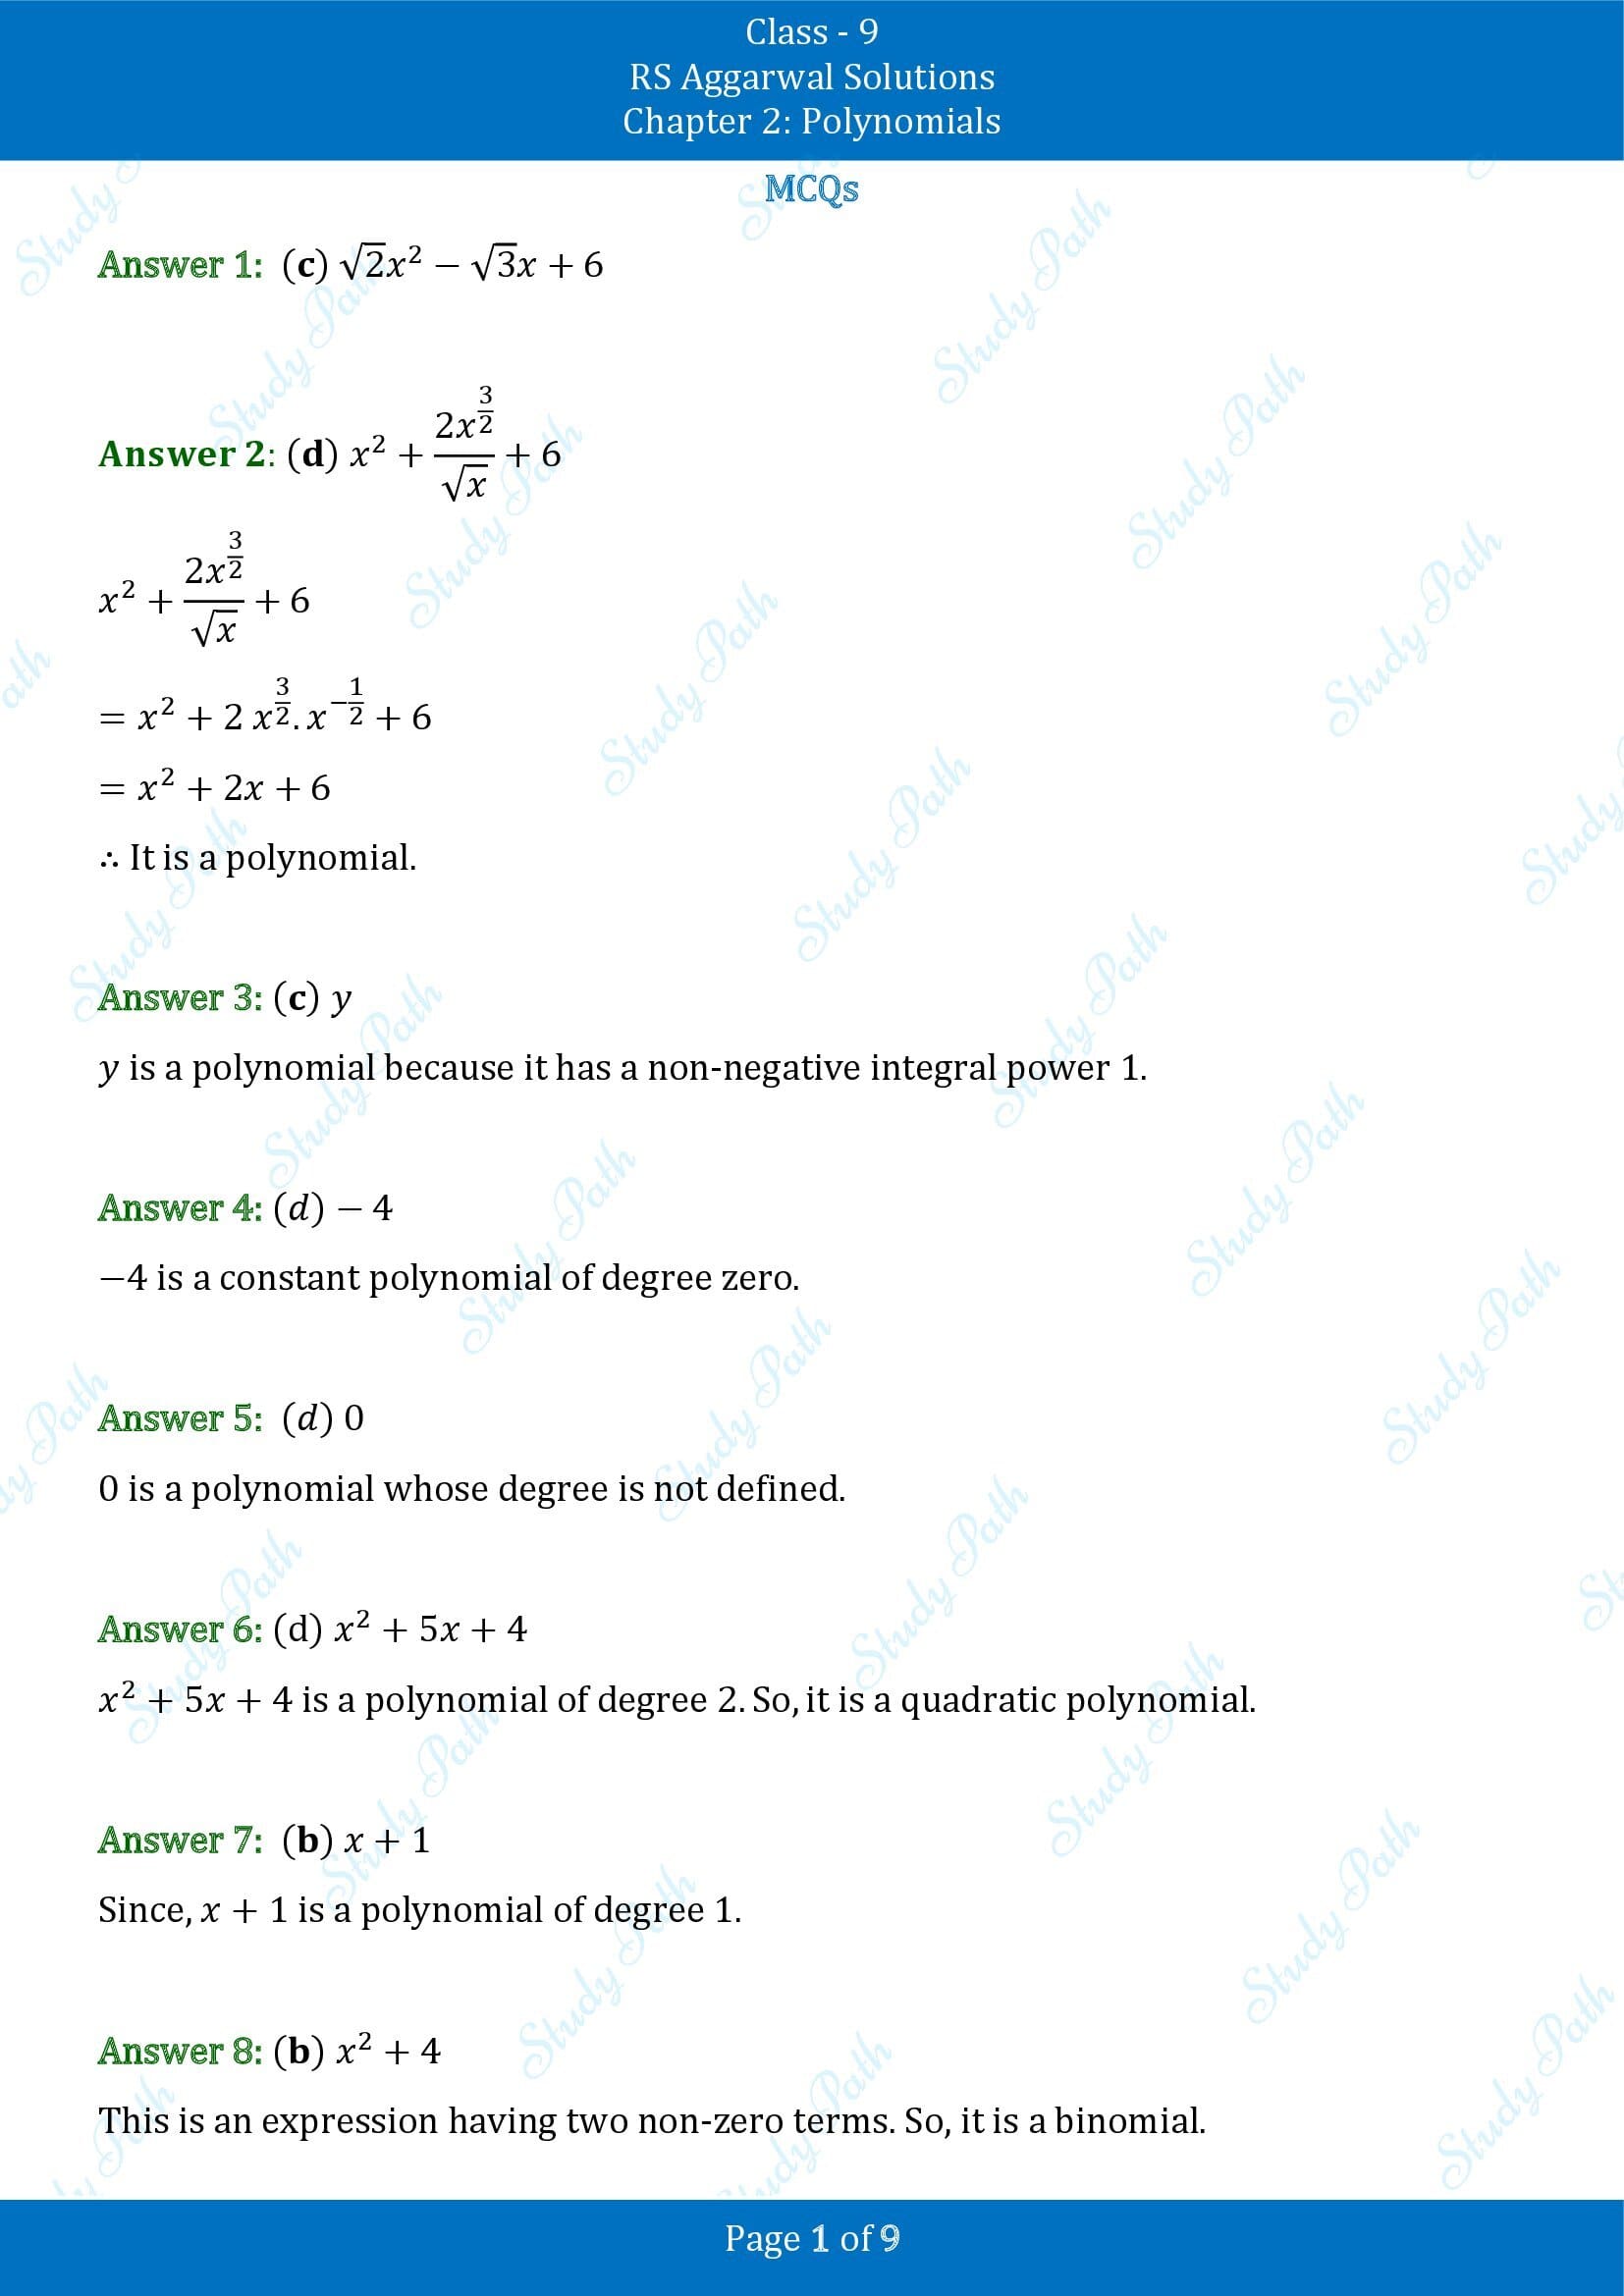 RS Aggarwal Solutions Class 9 Chapter 2 Polynomials Multiple Choice Questions MCQs 00001